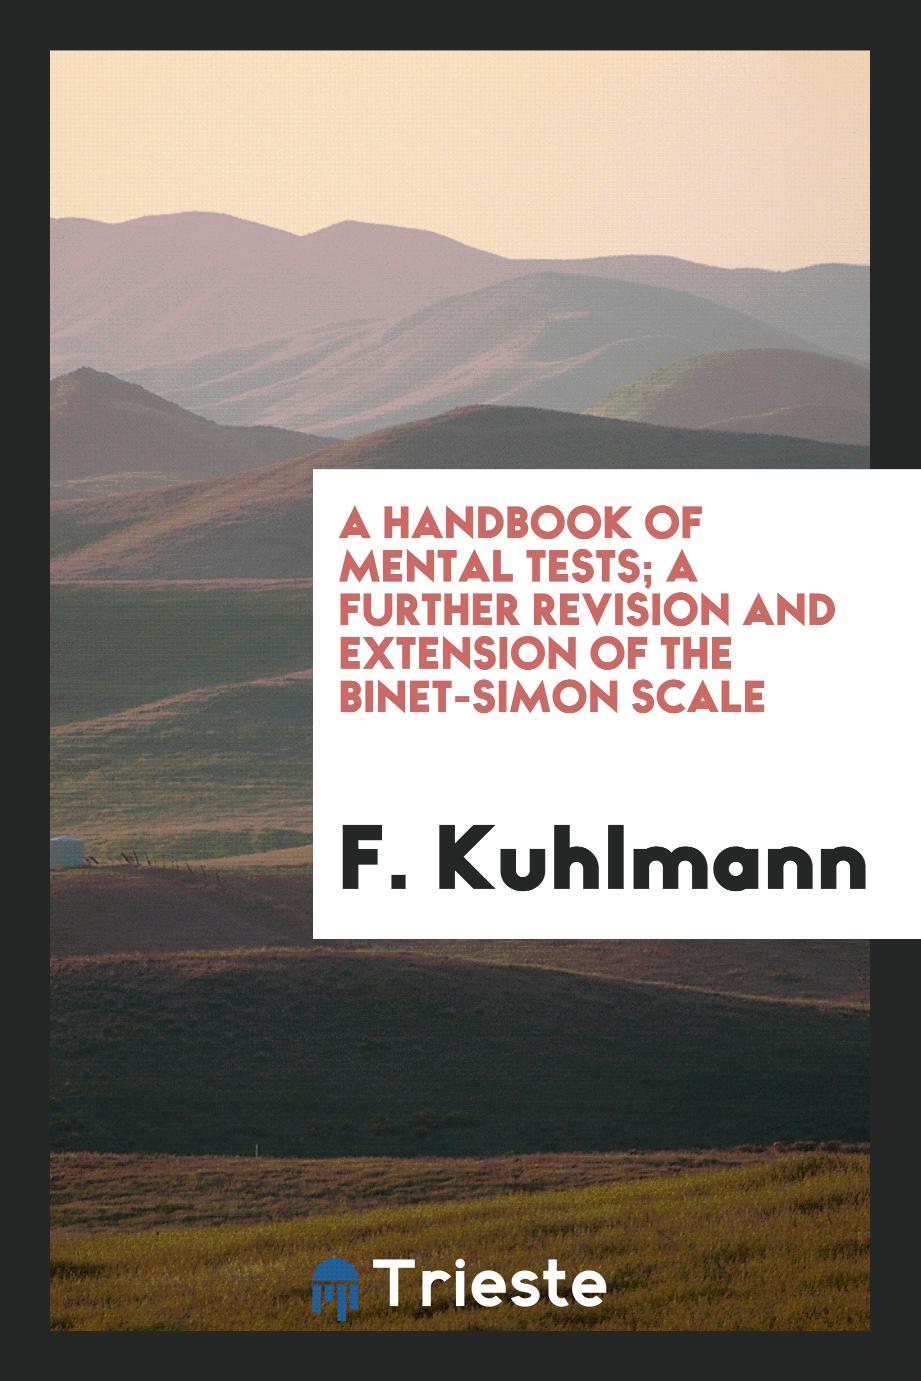 F. Kuhlmann - A handbook of mental tests; a further revision and extension of the Binet-Simon scale